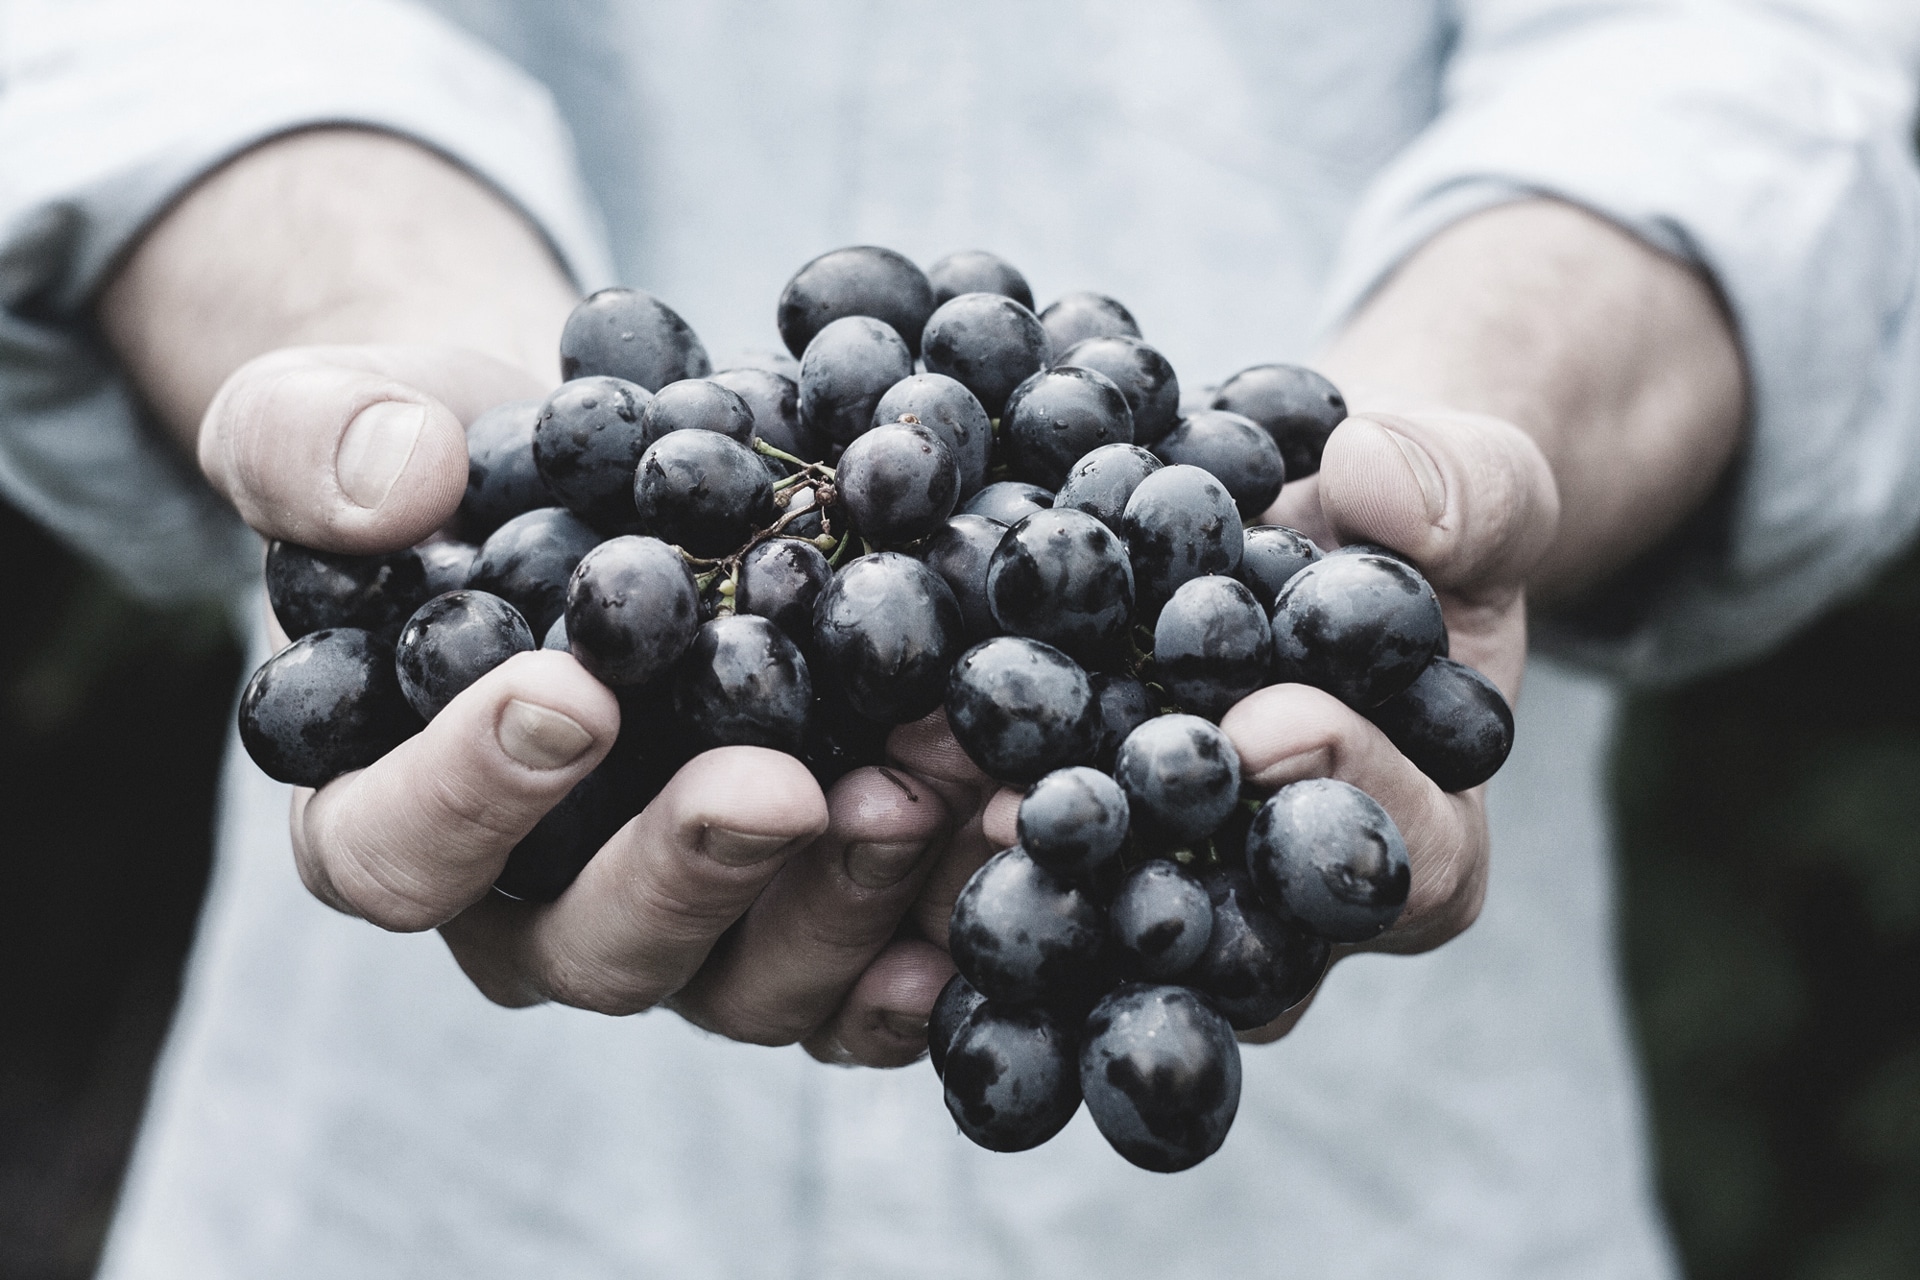 Hands presenting a bunch of ripe dark grapes.